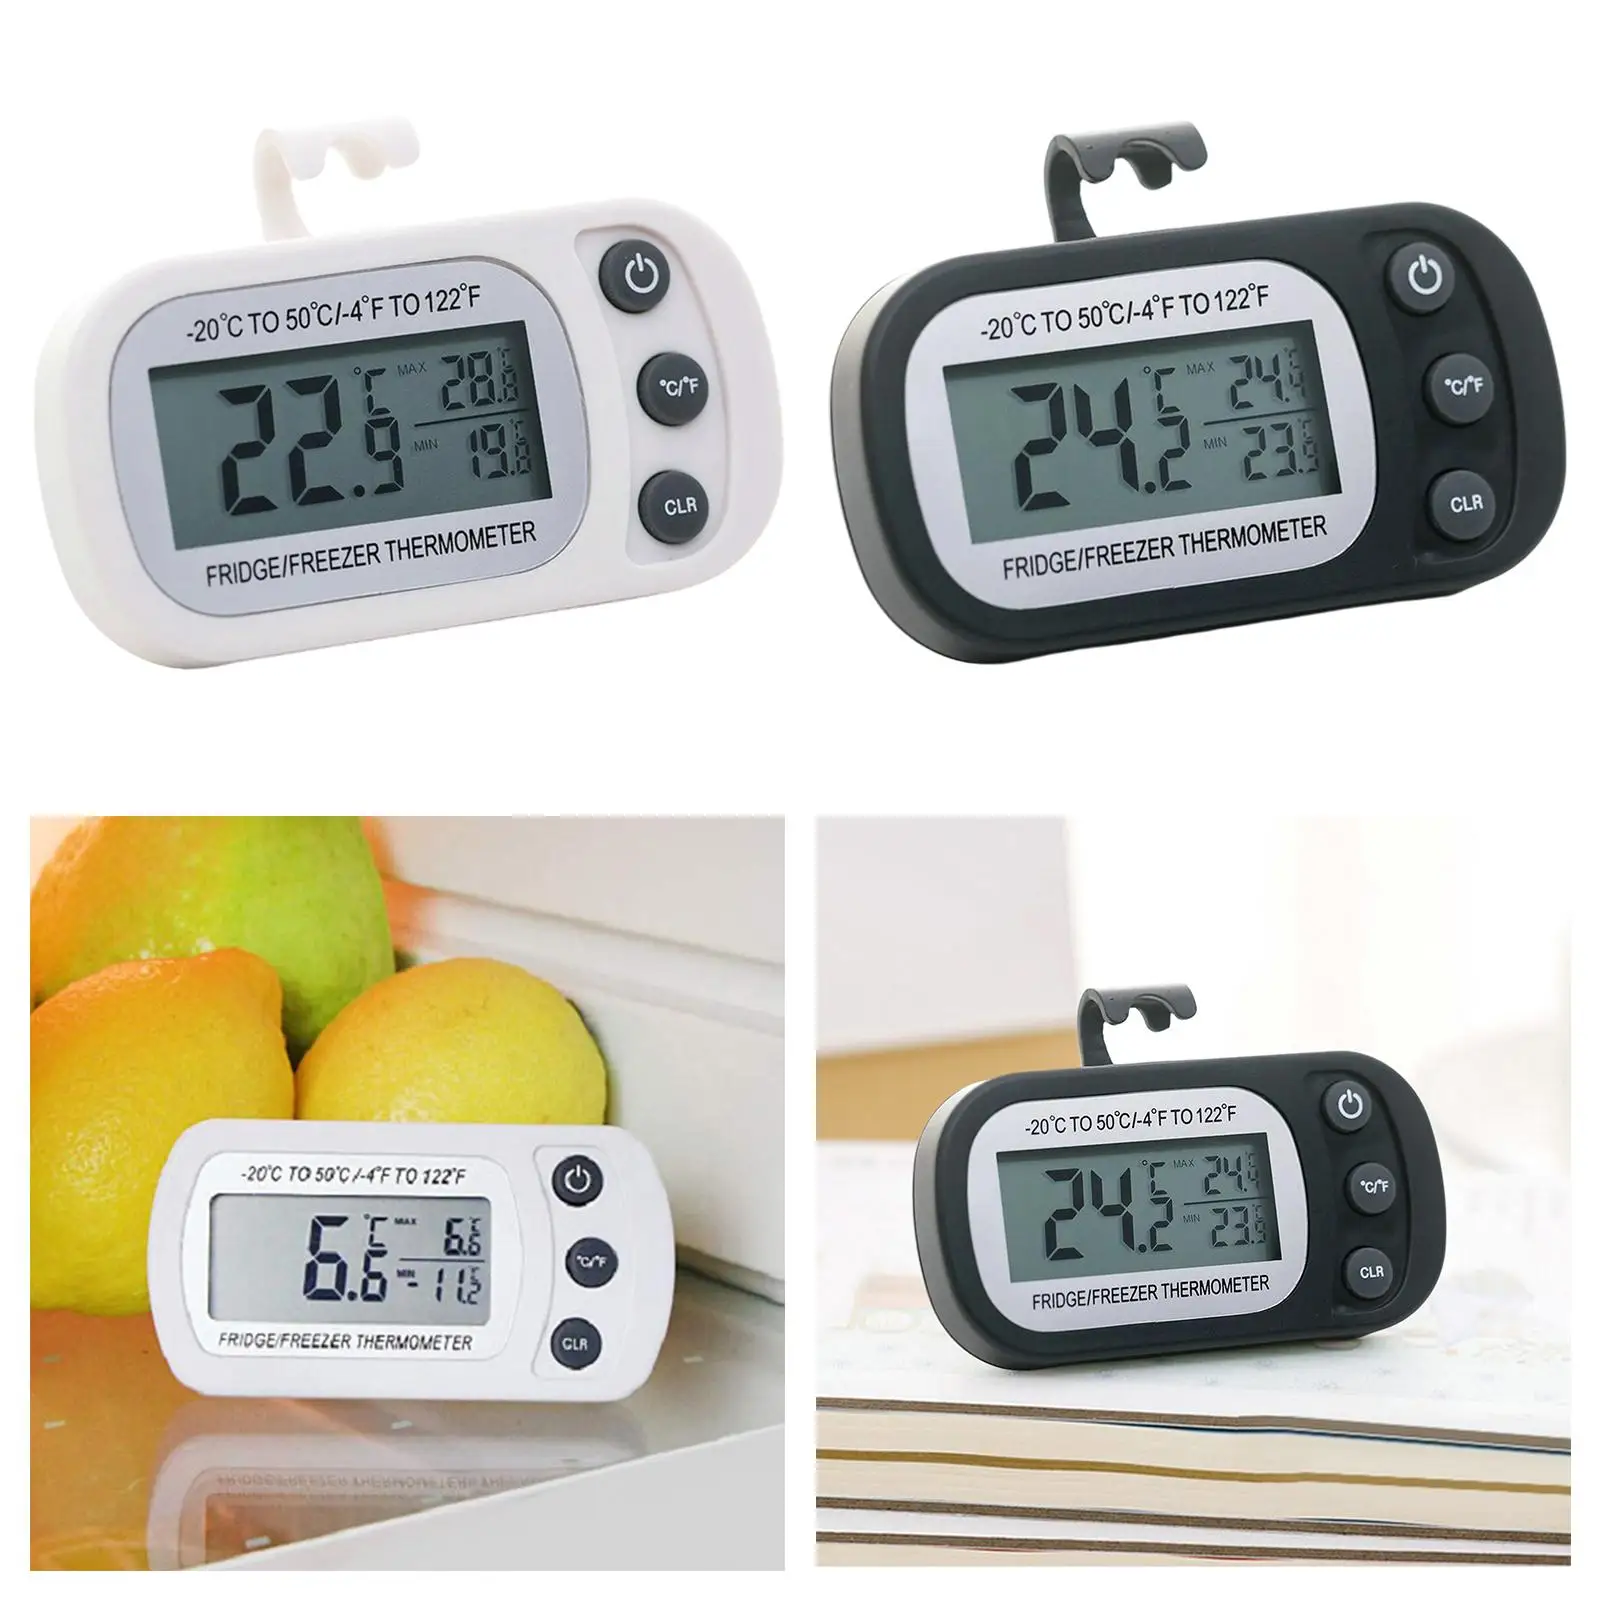 Freezer Thermometers LCD Display C/F with Probe Freezer Thermometer Digital Thermometers Temperature Monitor for Restaurants